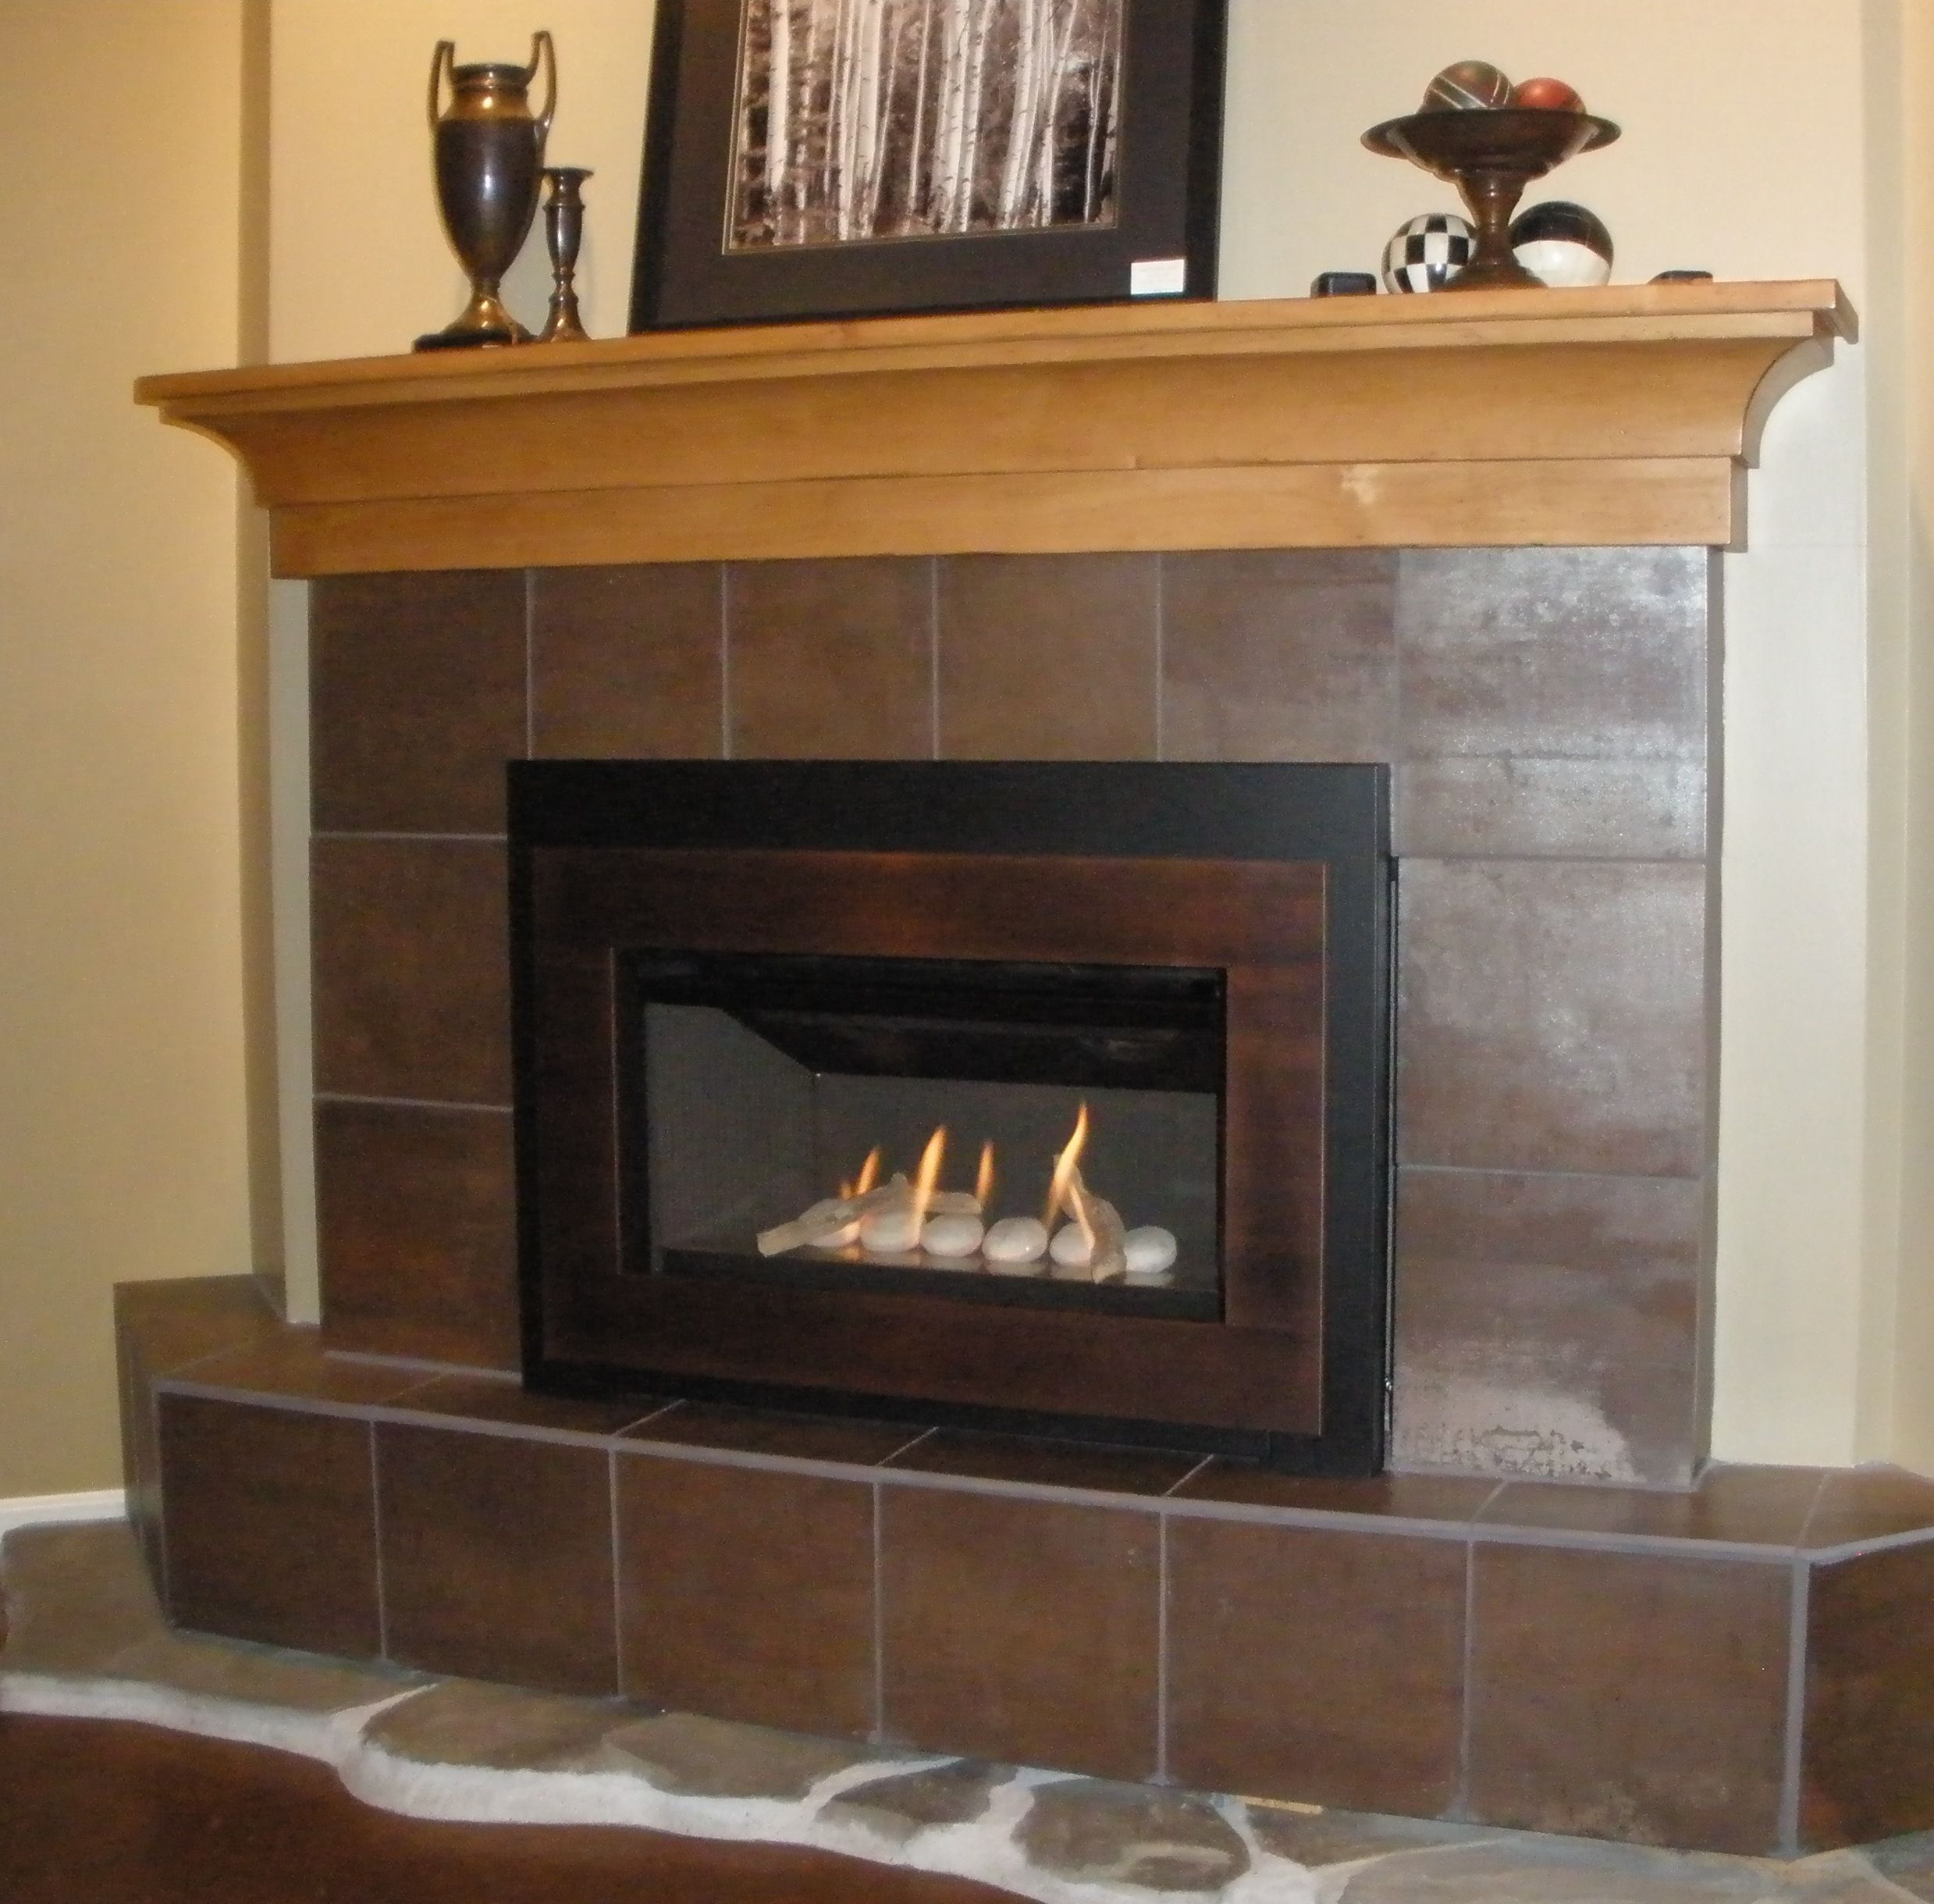 Mendota Gas Fireplace Insert Reviews Awesome Pin On Valor Radiant Gas Fireplaces Midwest Dealer